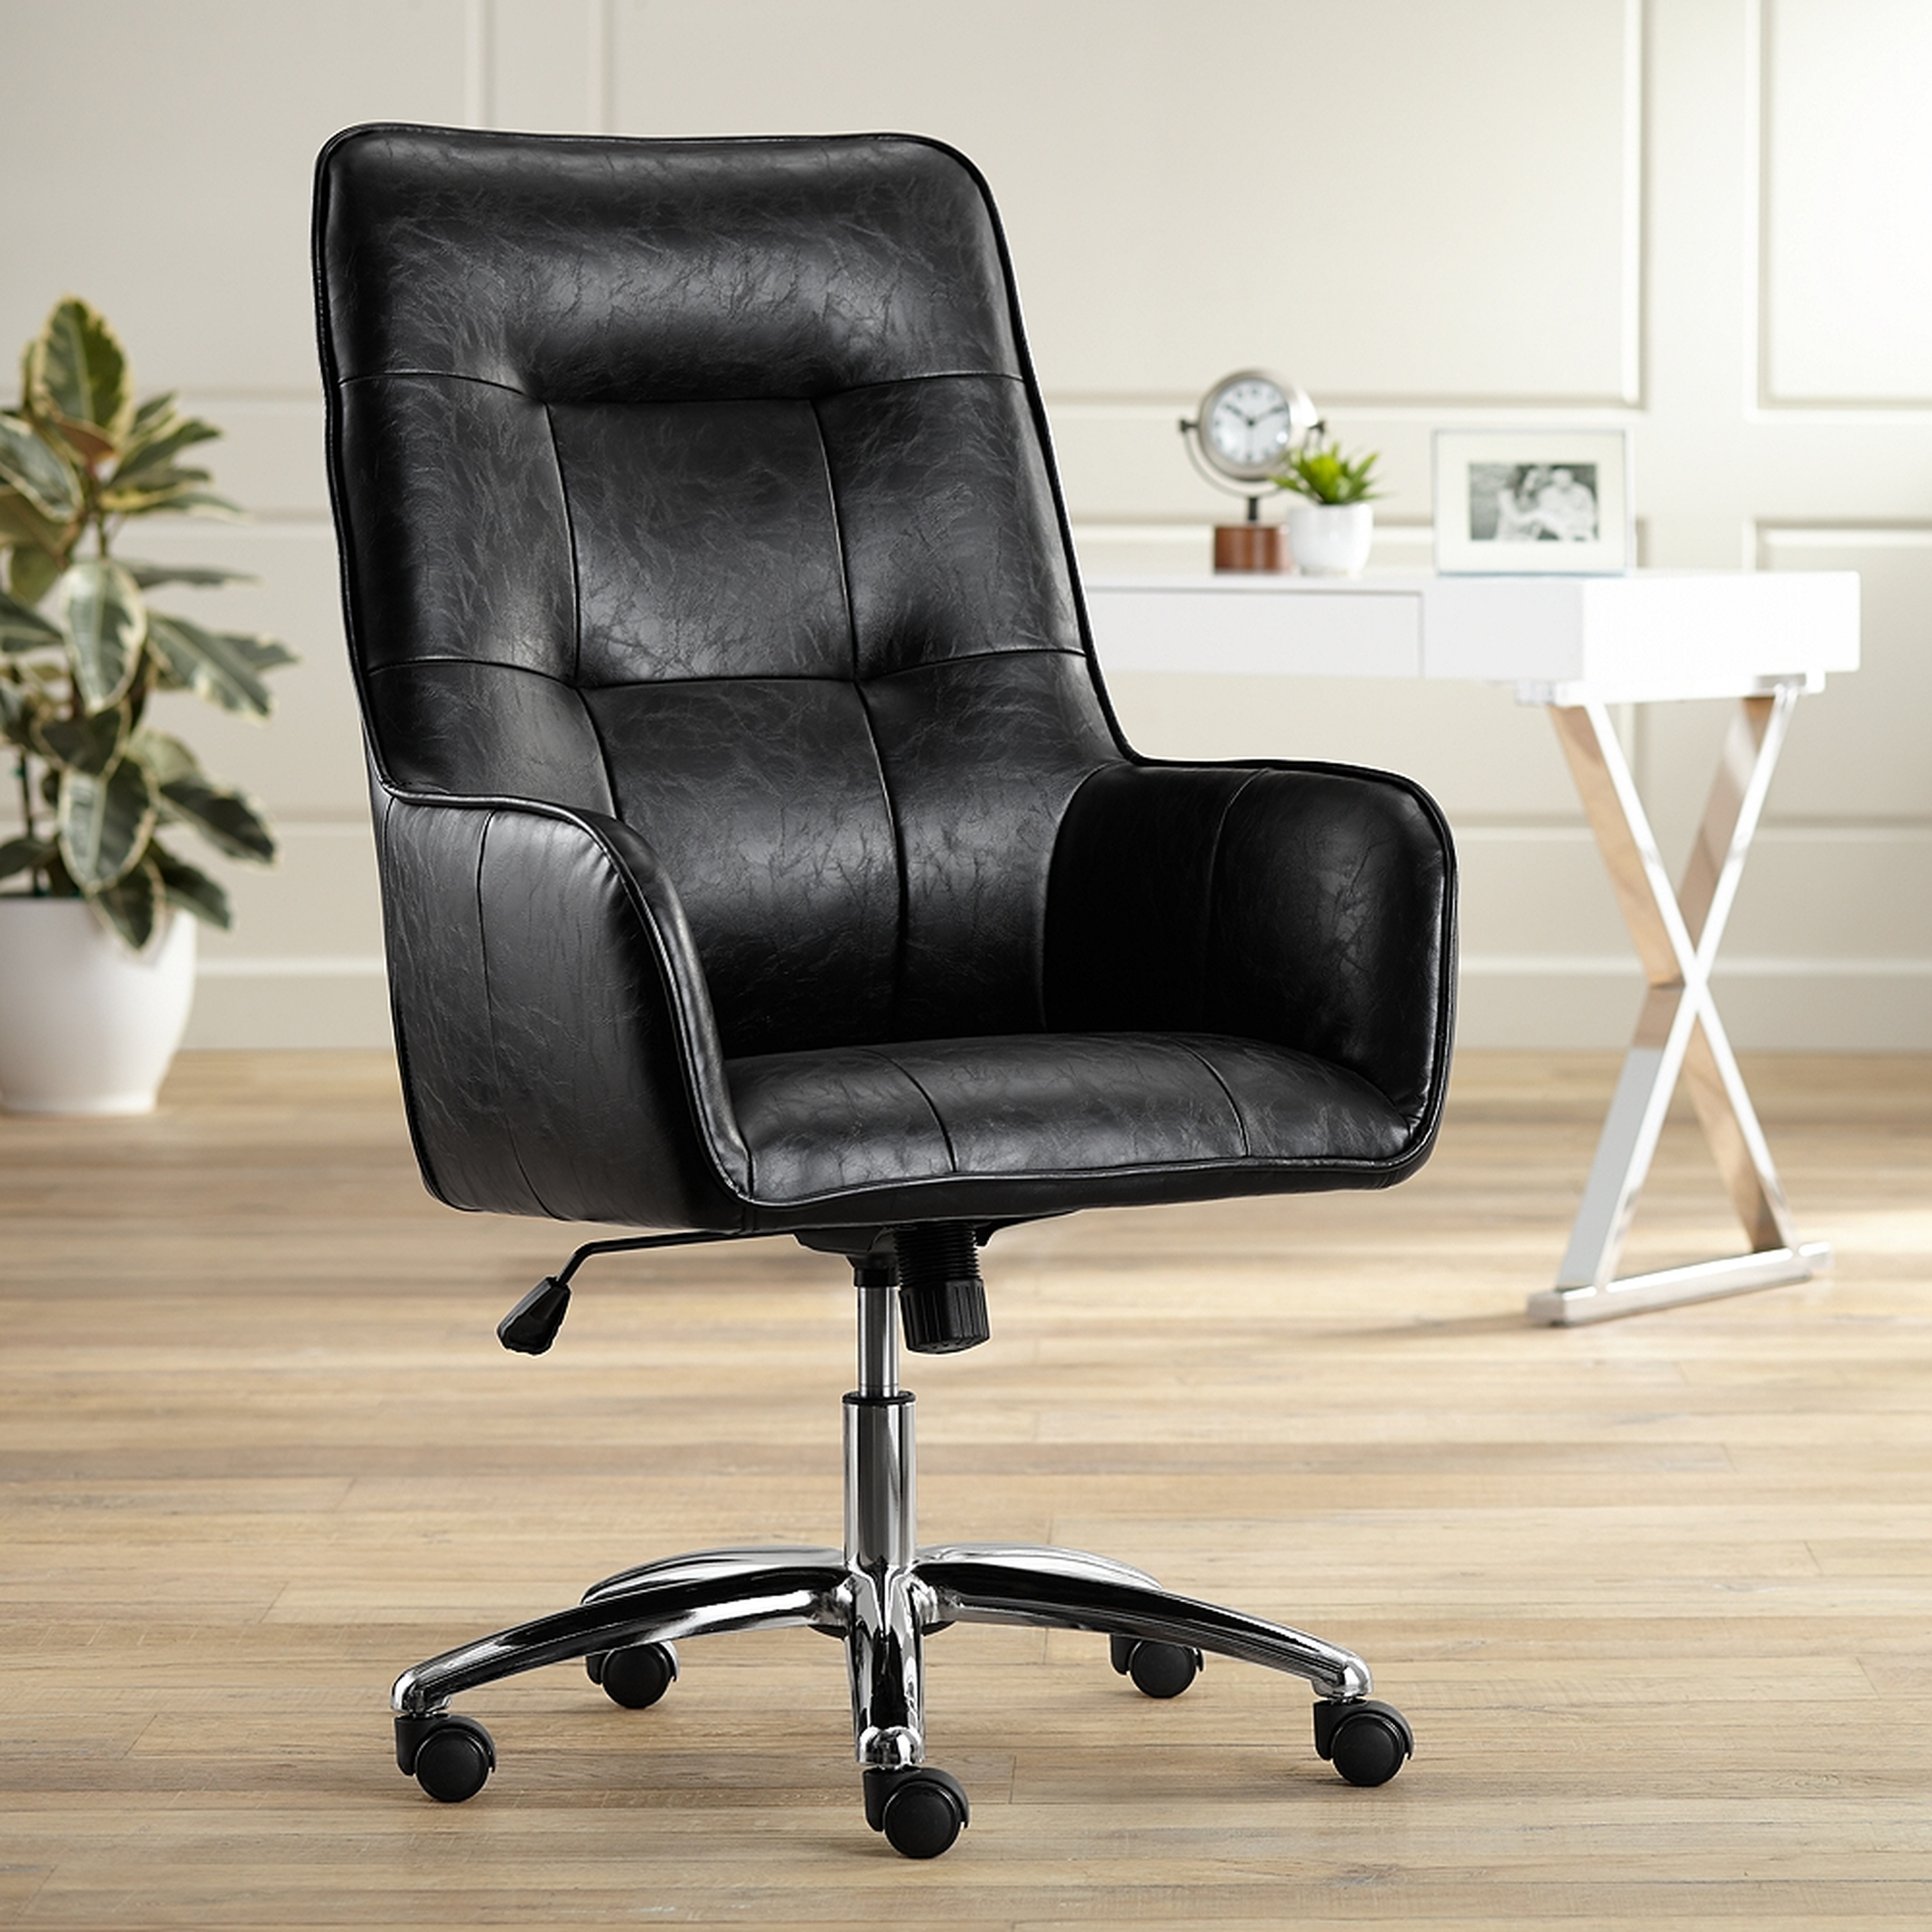 Javen Black Faux Leather Swivel Office Chair - Style # 63K79 - Lamps Plus